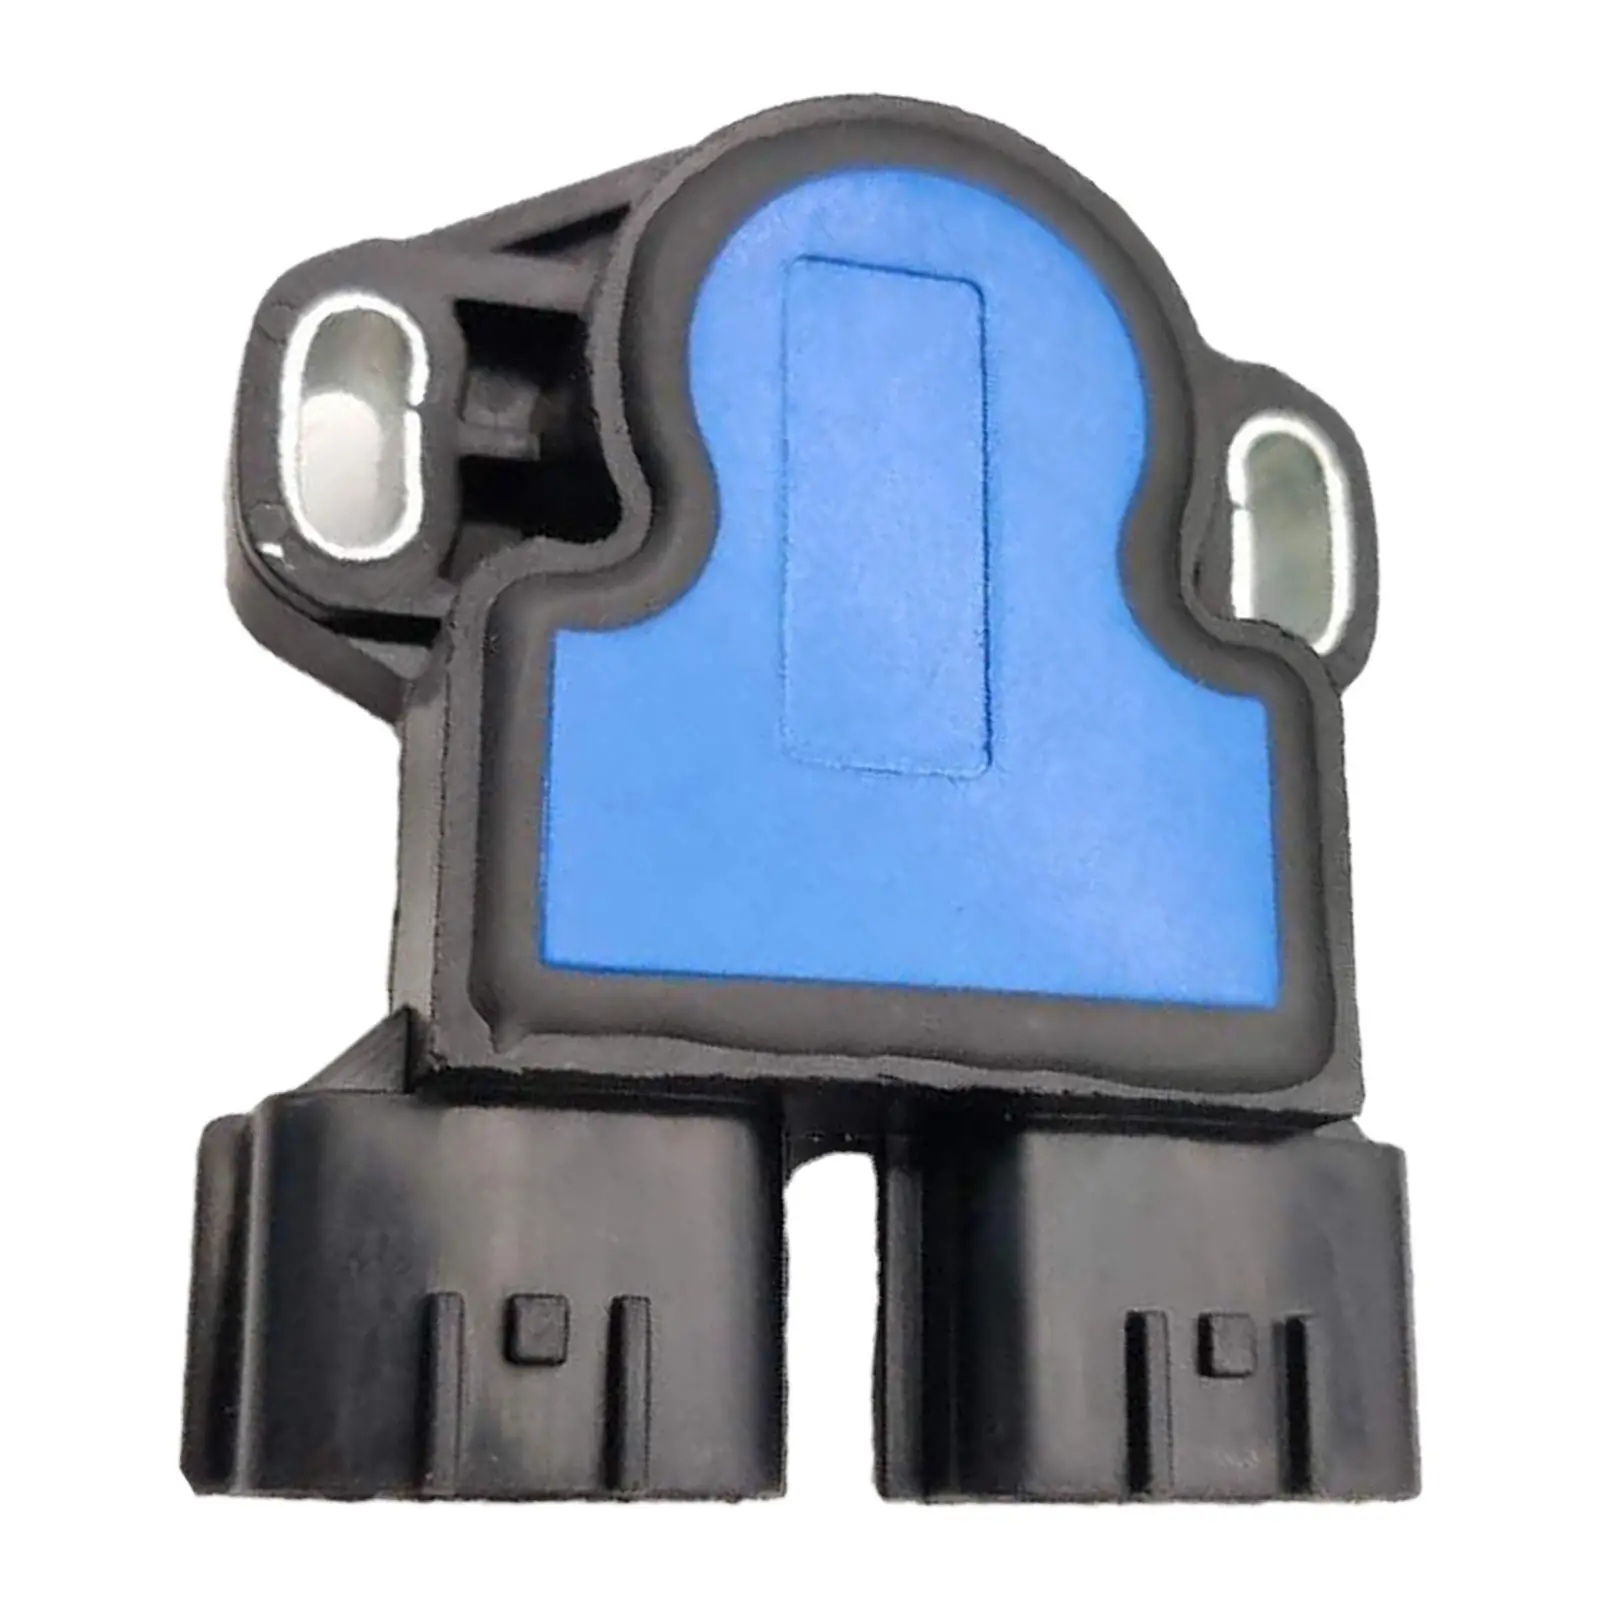 Throttle Position Sensor Fits for Nissan Xterra Frontier Engine SERA486-07 8971631640 Replacement Accessories